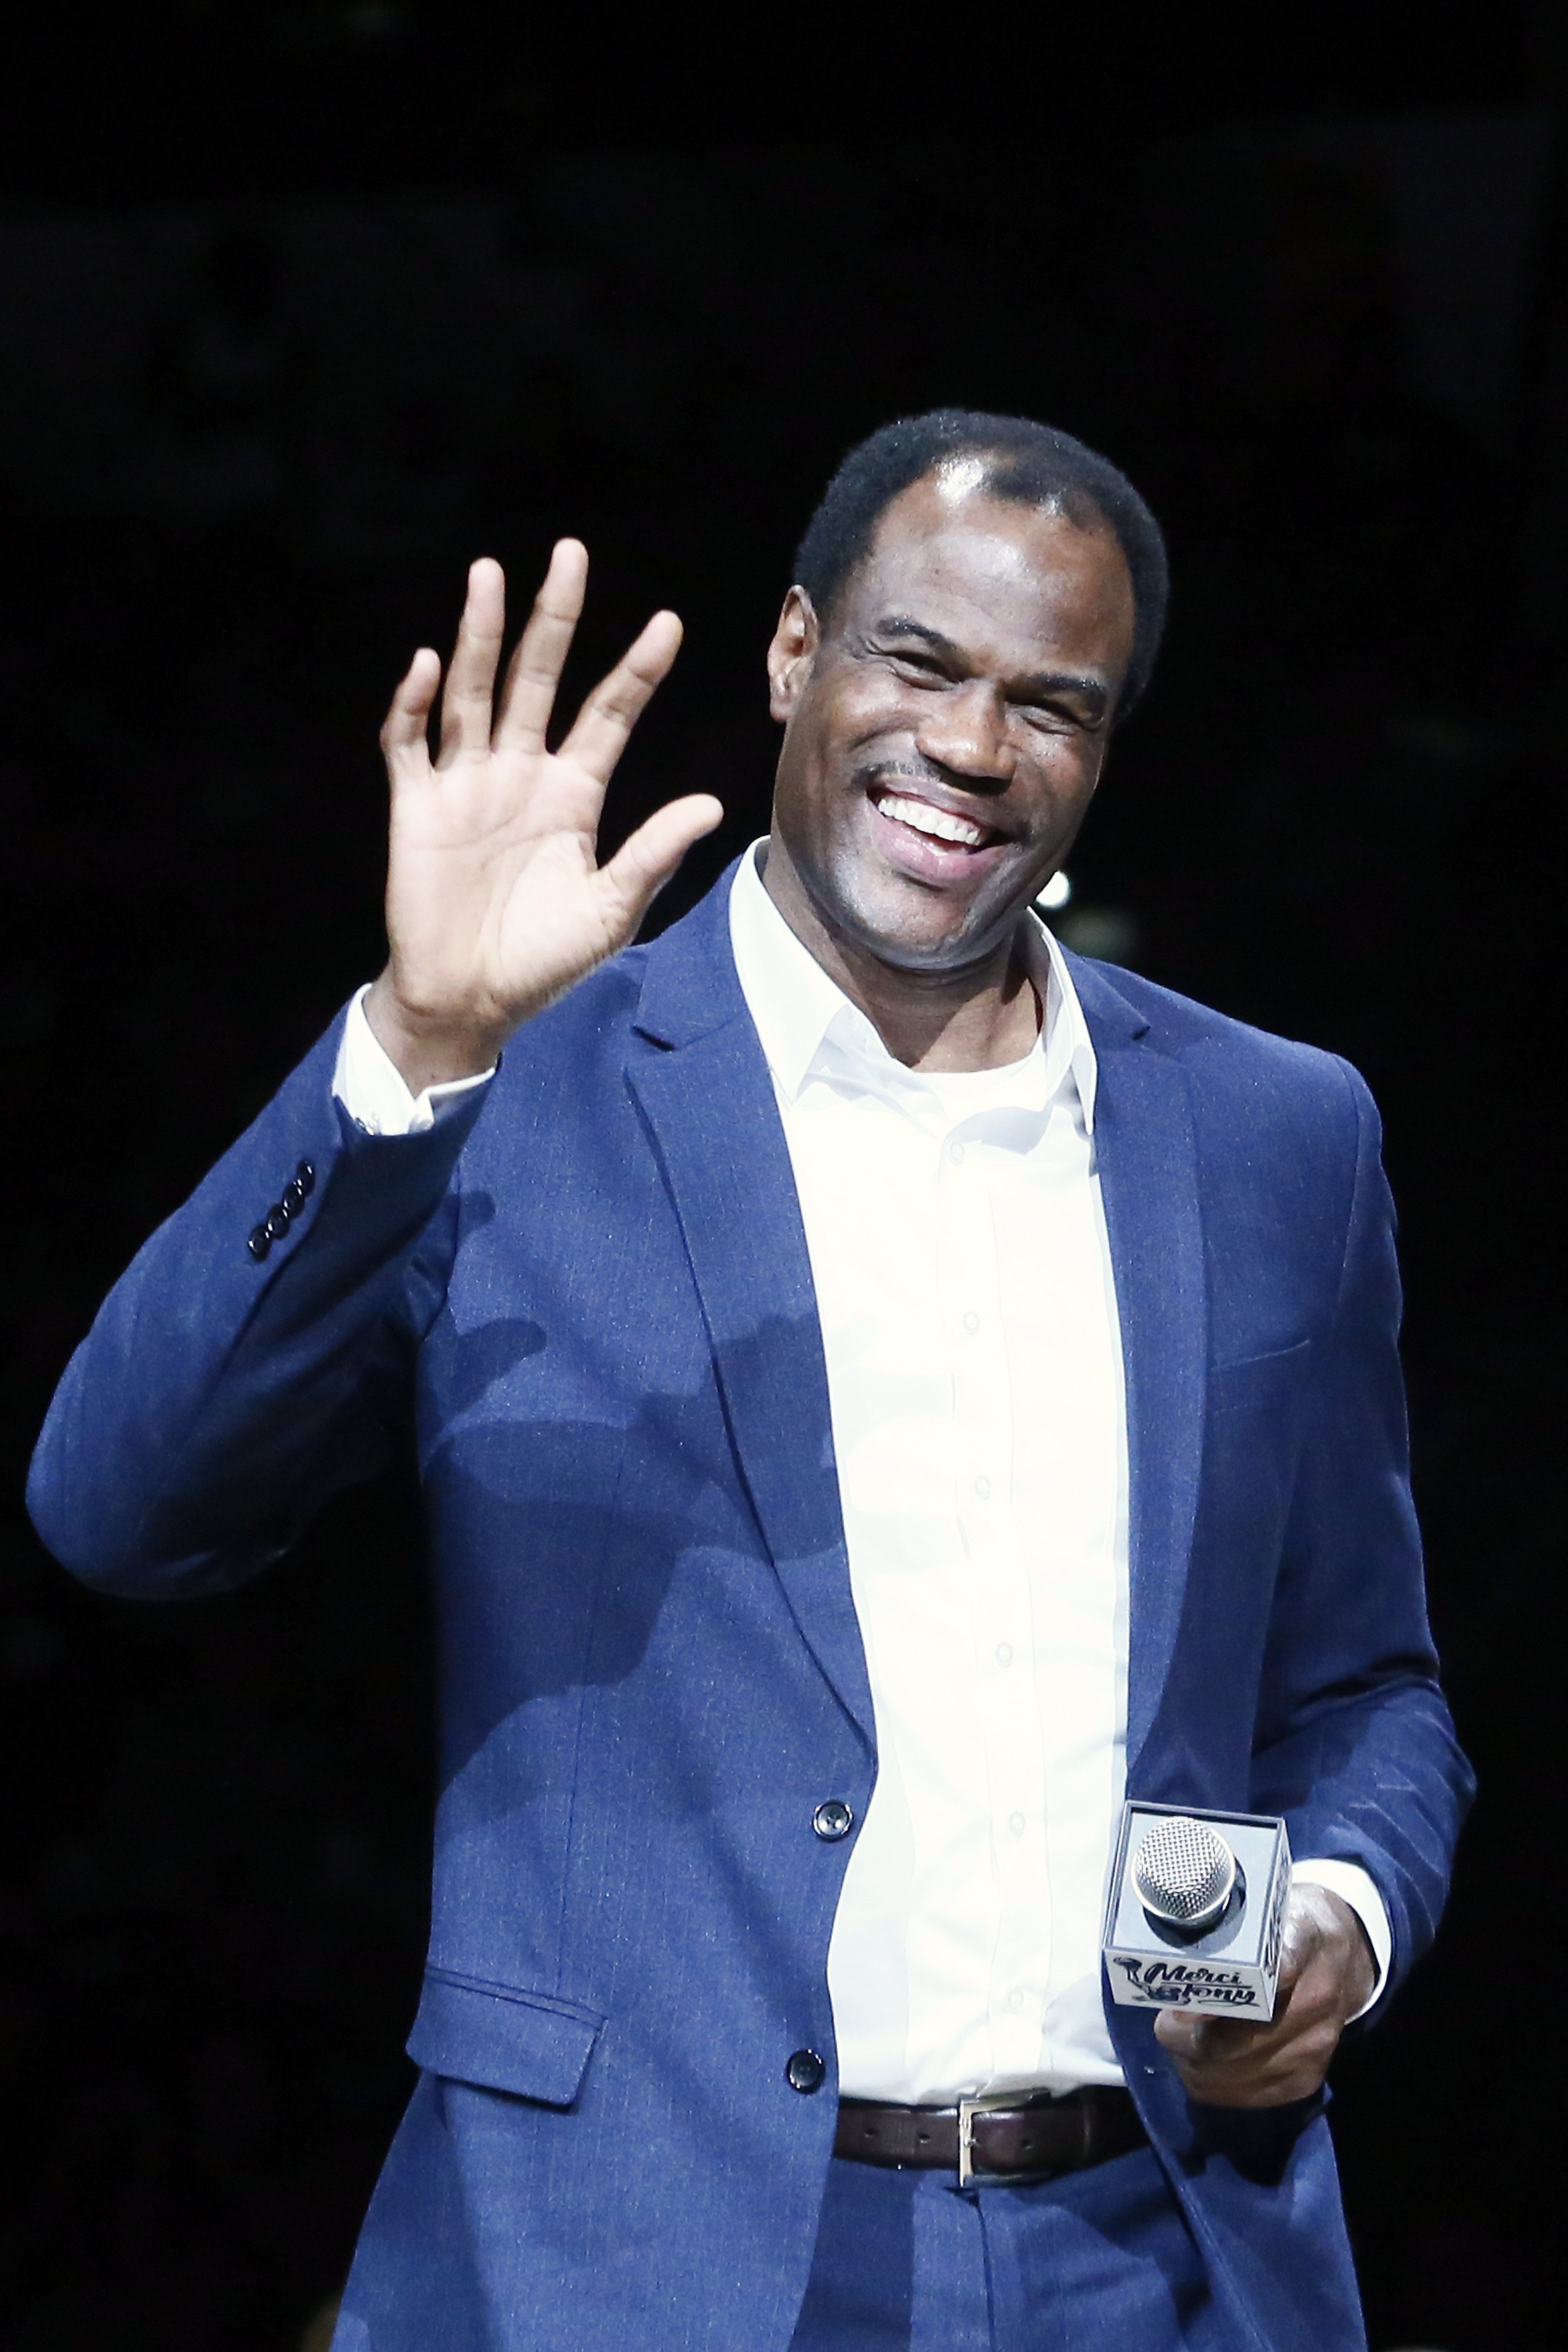 David Robinson, speaks during the Tony Parker jersey retirement ceremony prior to a game between the Memphis Grizzlies and the San Antonio Spurs on November 11, 2019 | Photo: Getty Images